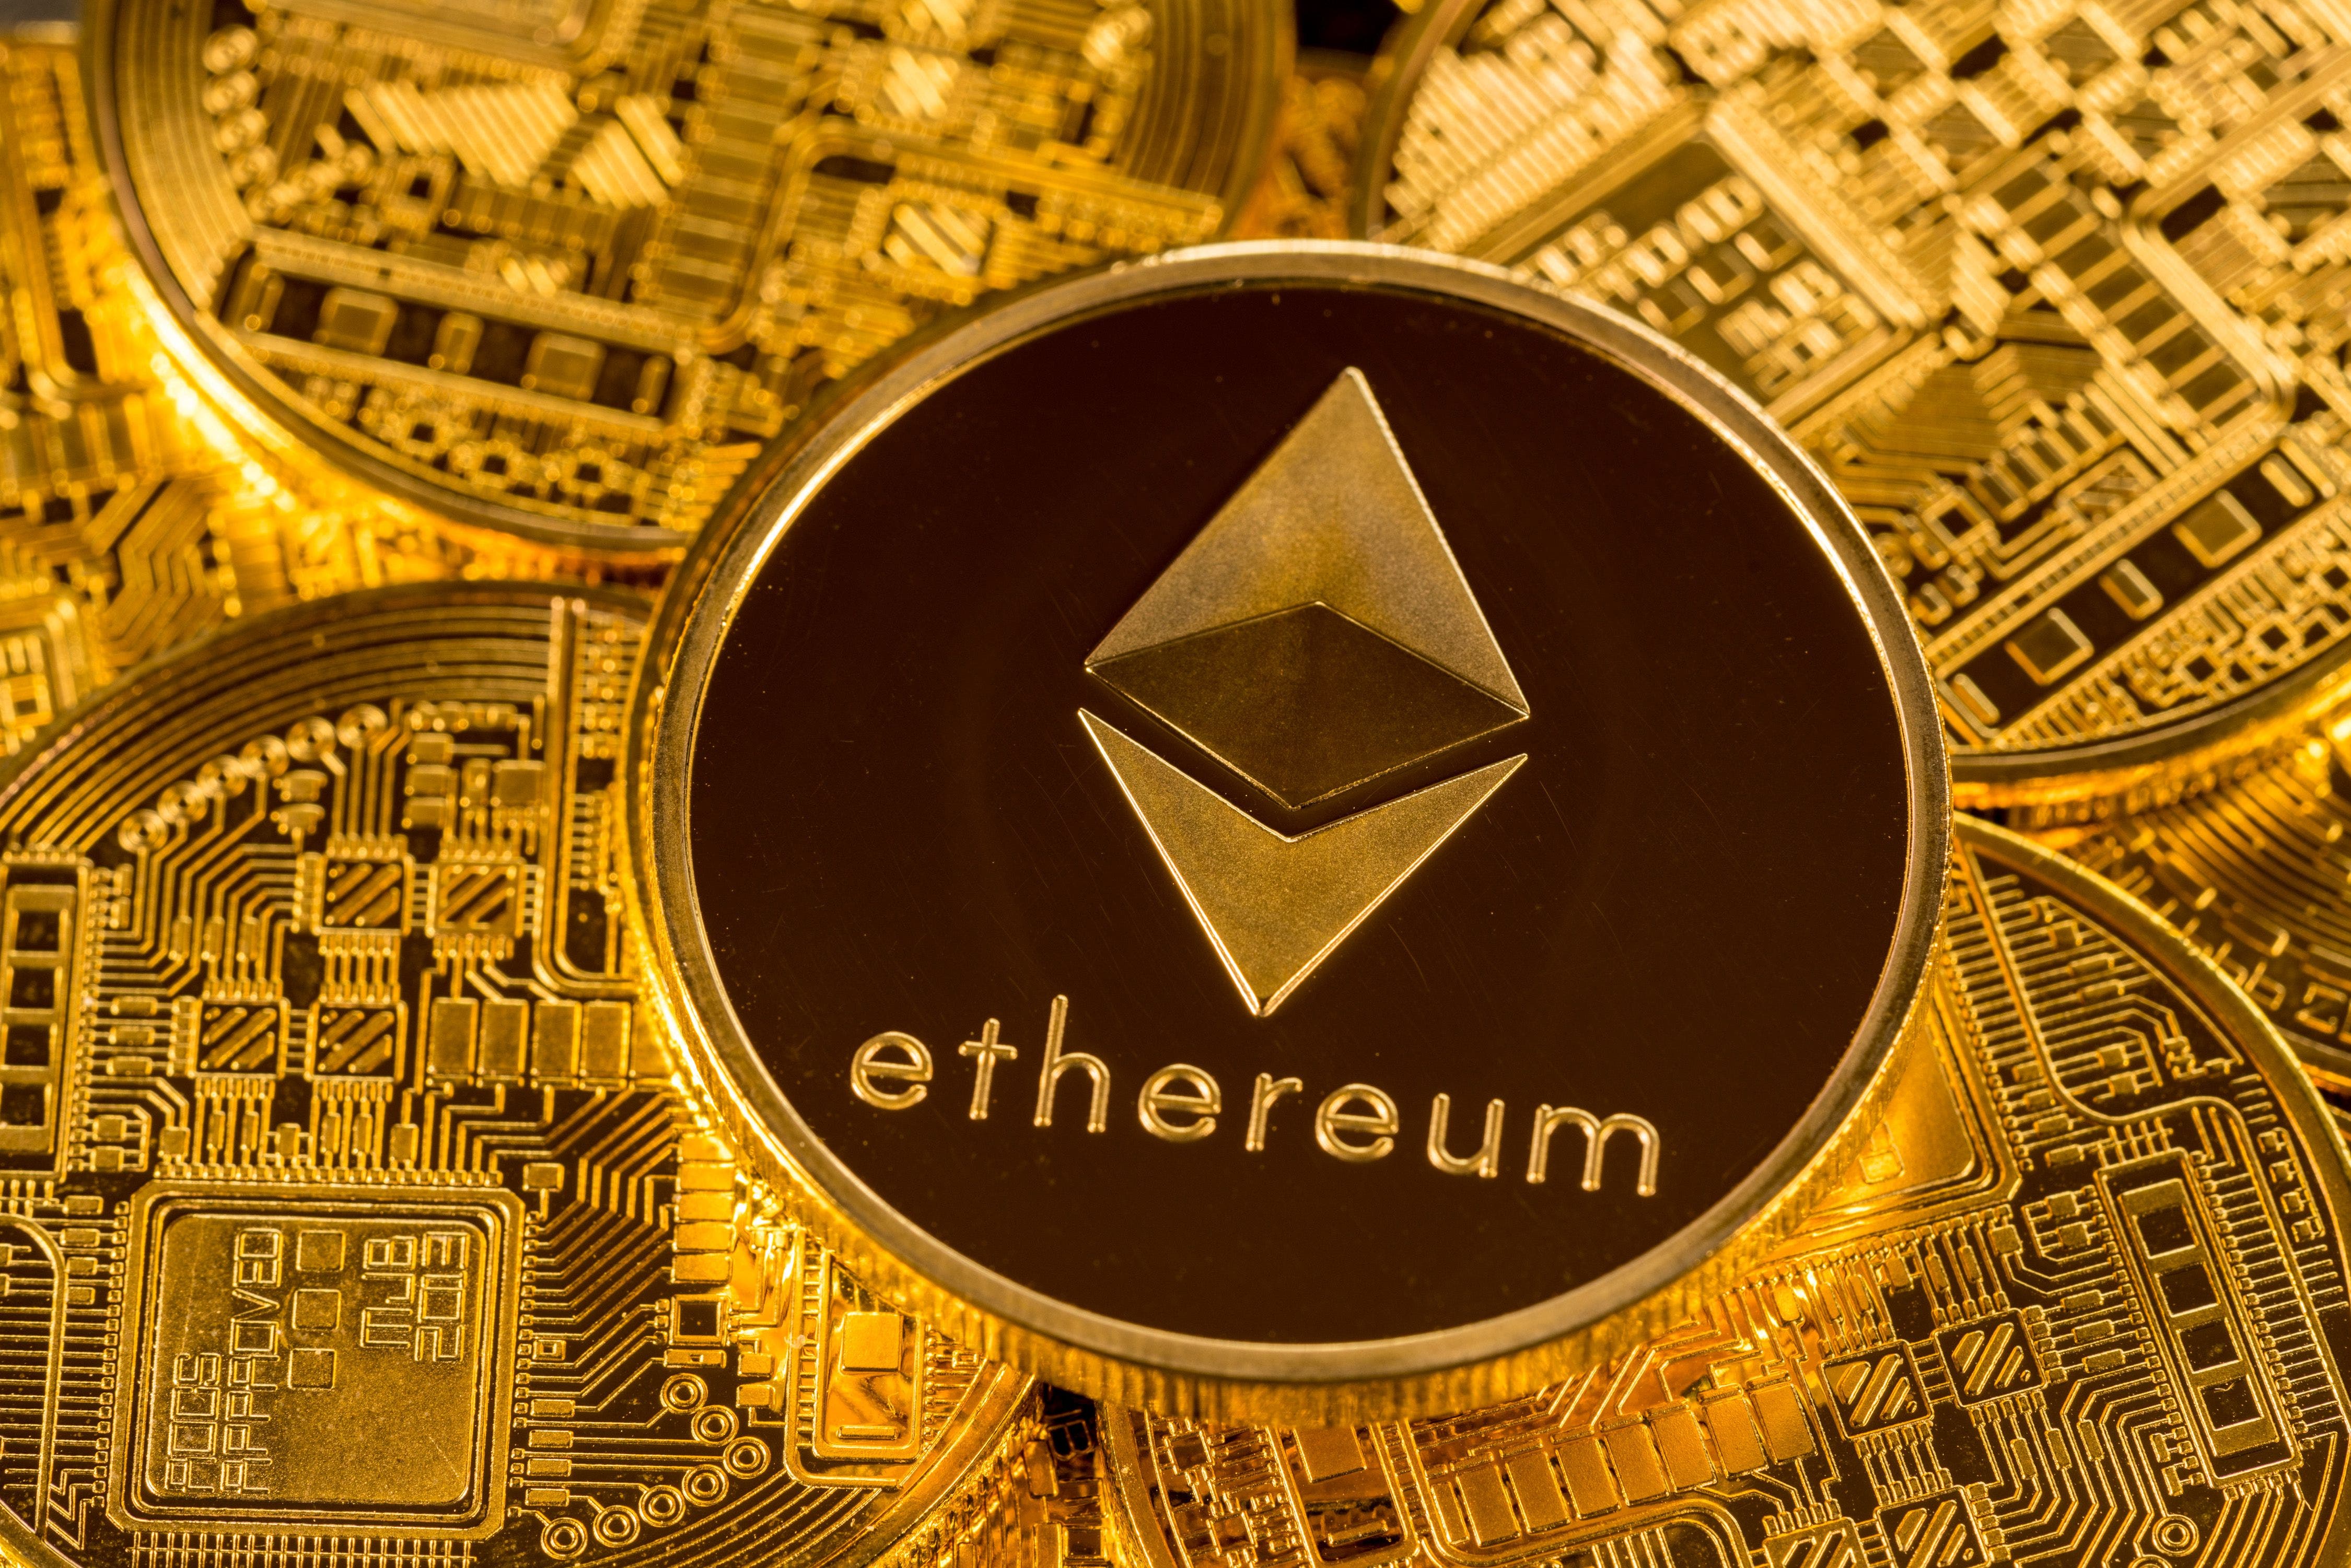 Ethereum Rises Above This Key Level; Huobi Token, Dogecoin Among Top Gainers